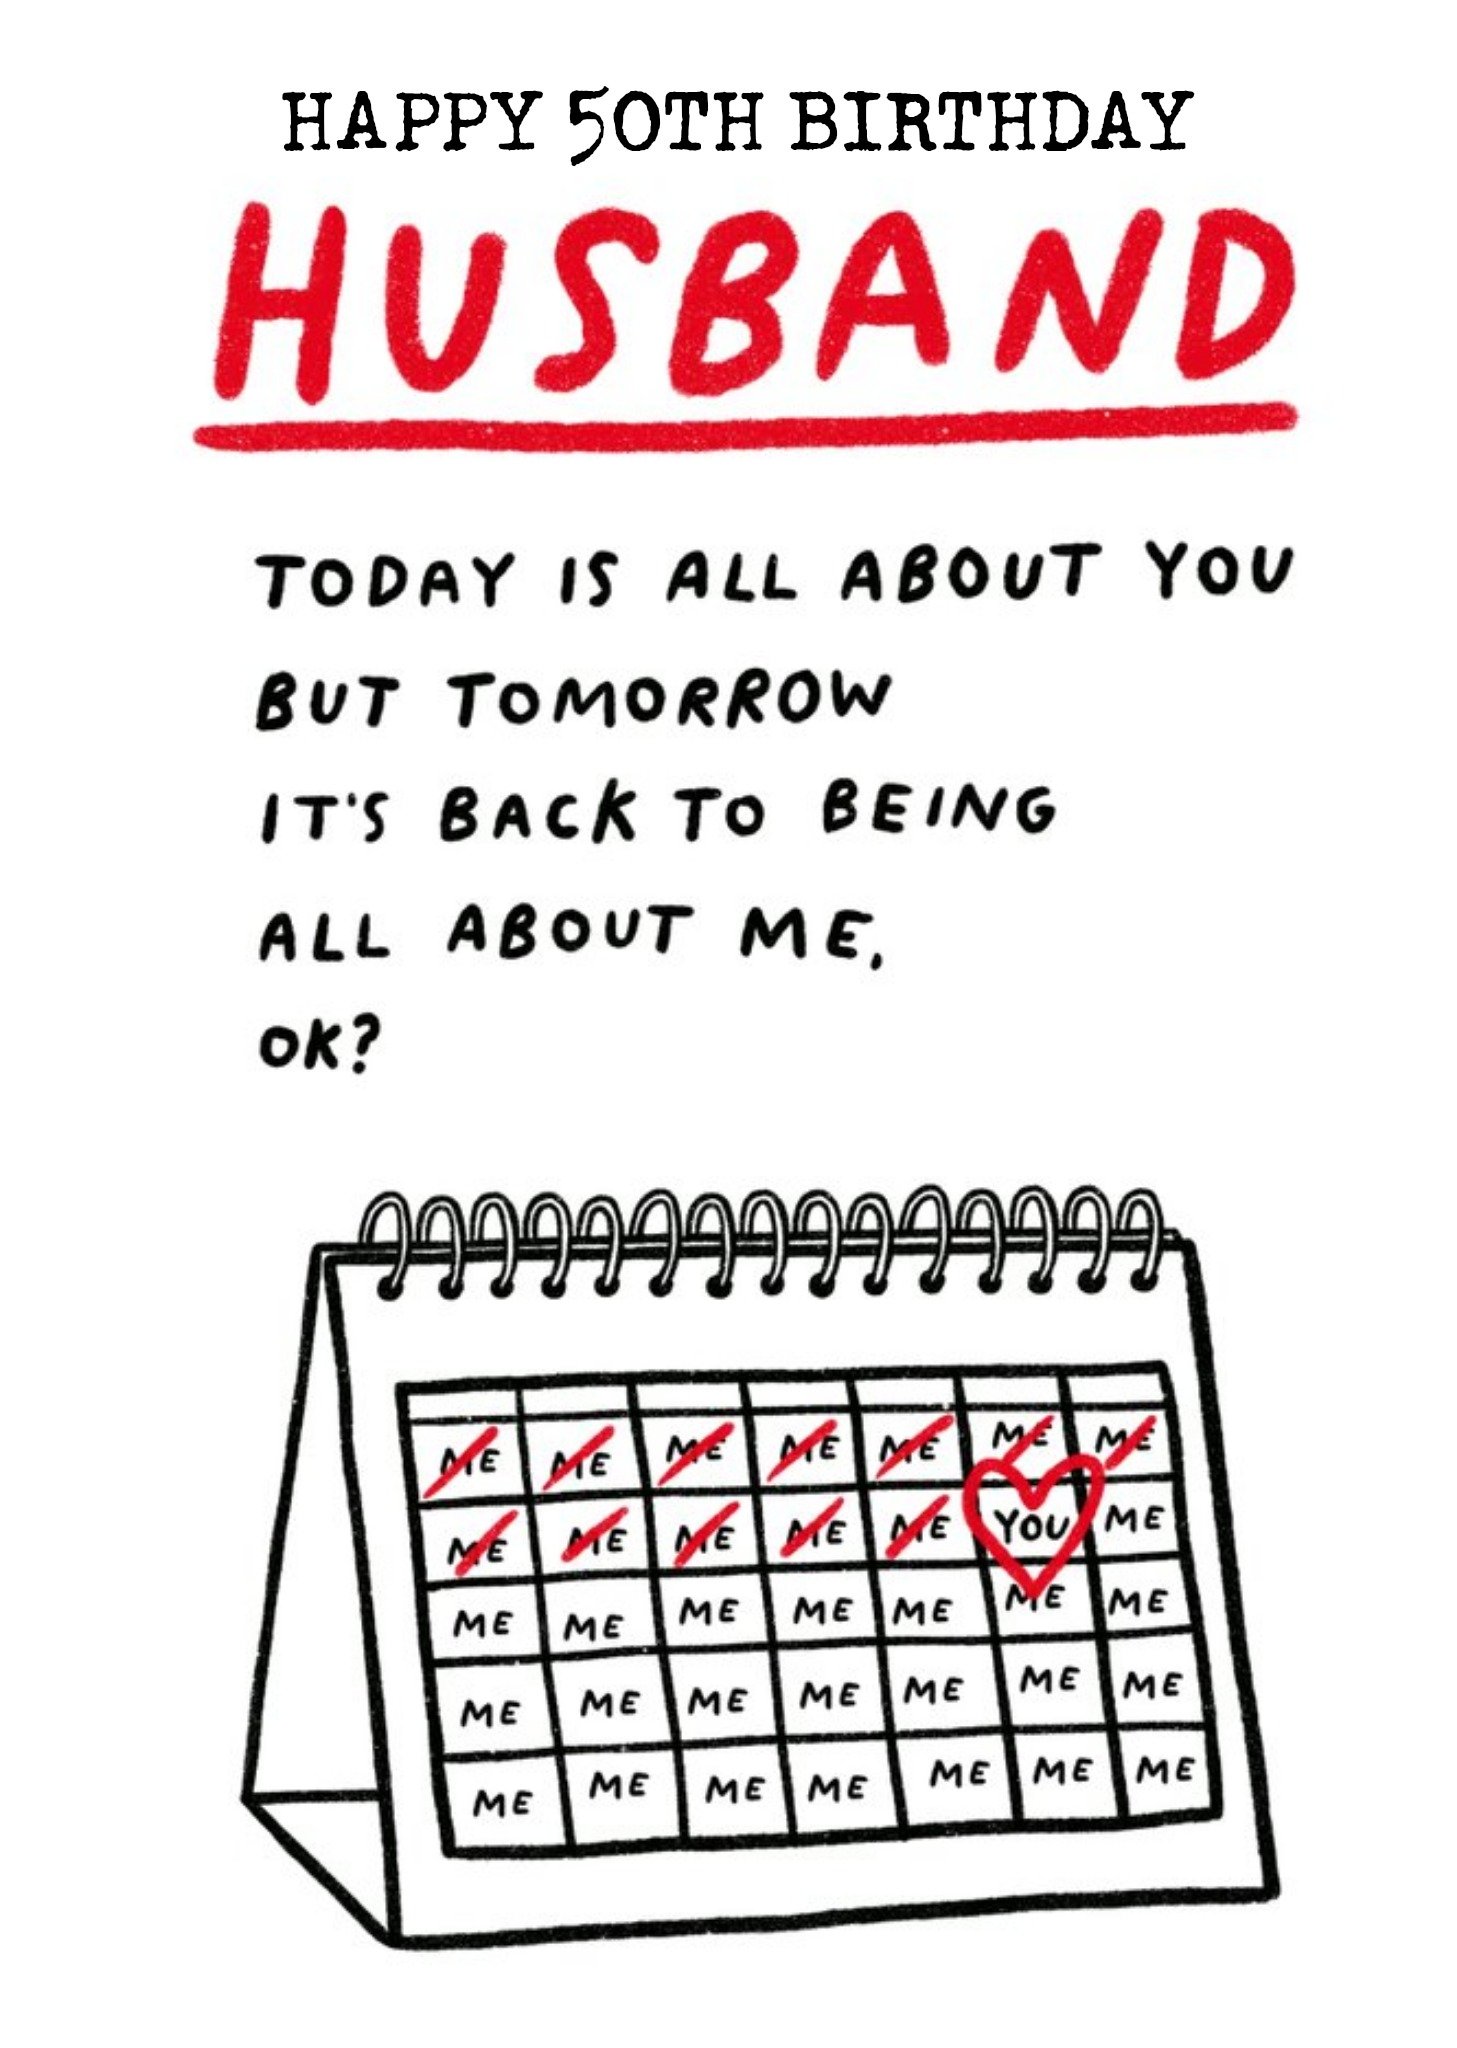 Moonpig Illustration Of A Monthly Planner Husband's Humorous 50th Birthday Card, Large